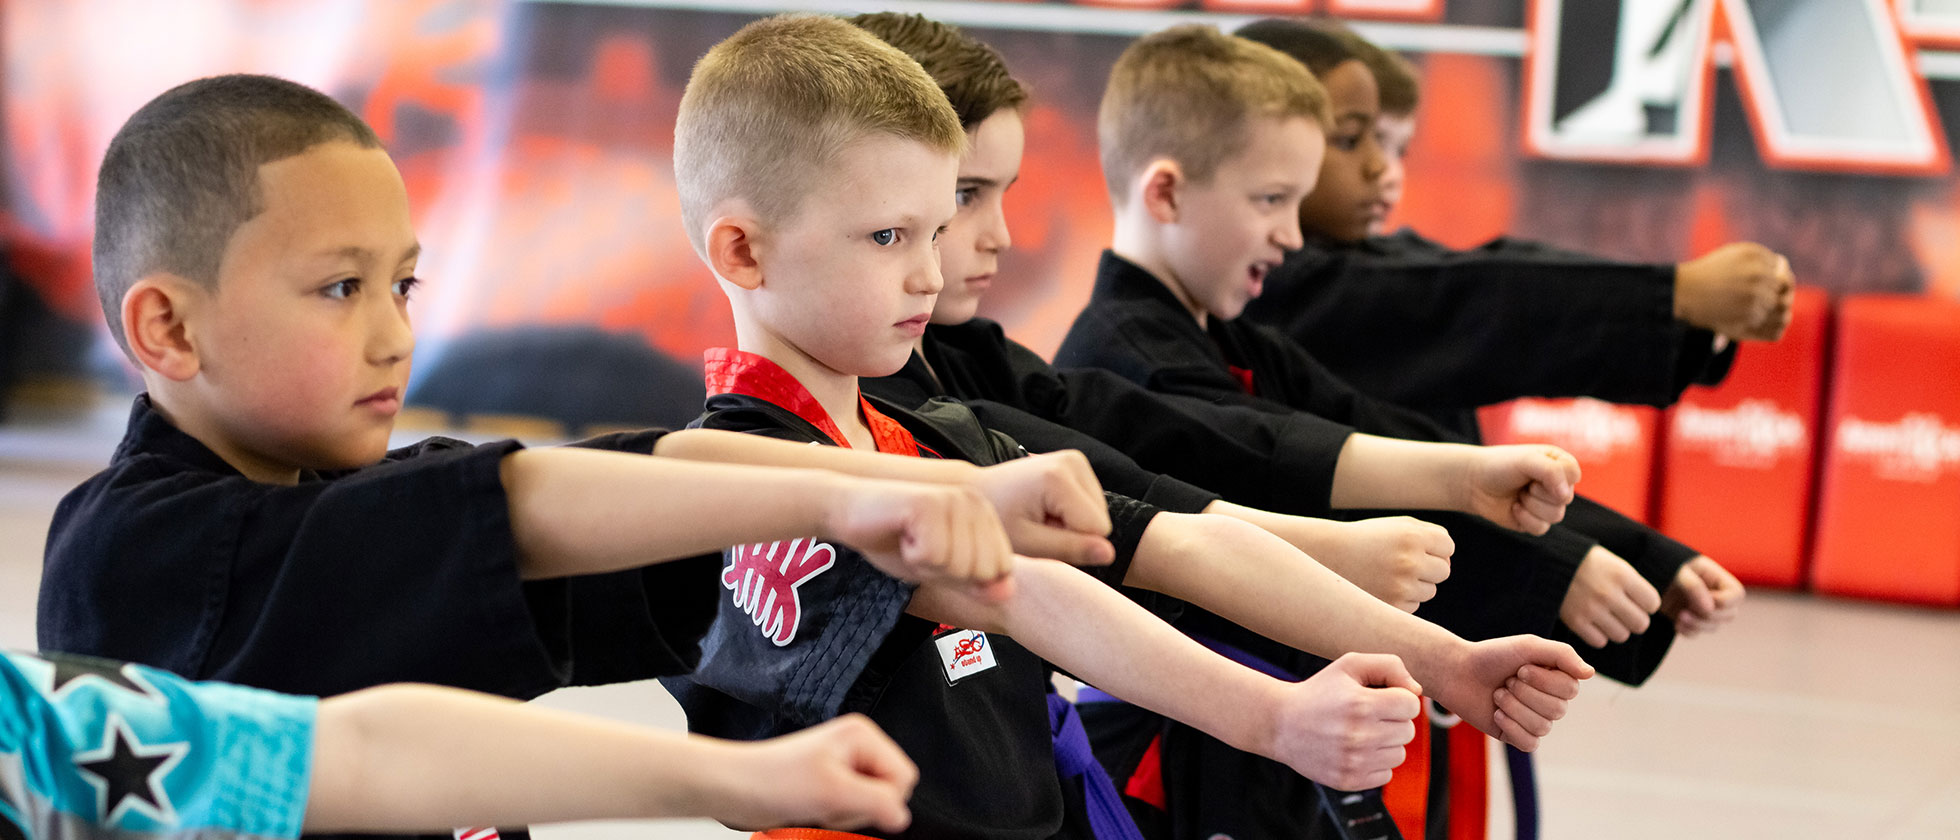 Martial Arts In Blue Springs, Missouri for Ages 3 & 4